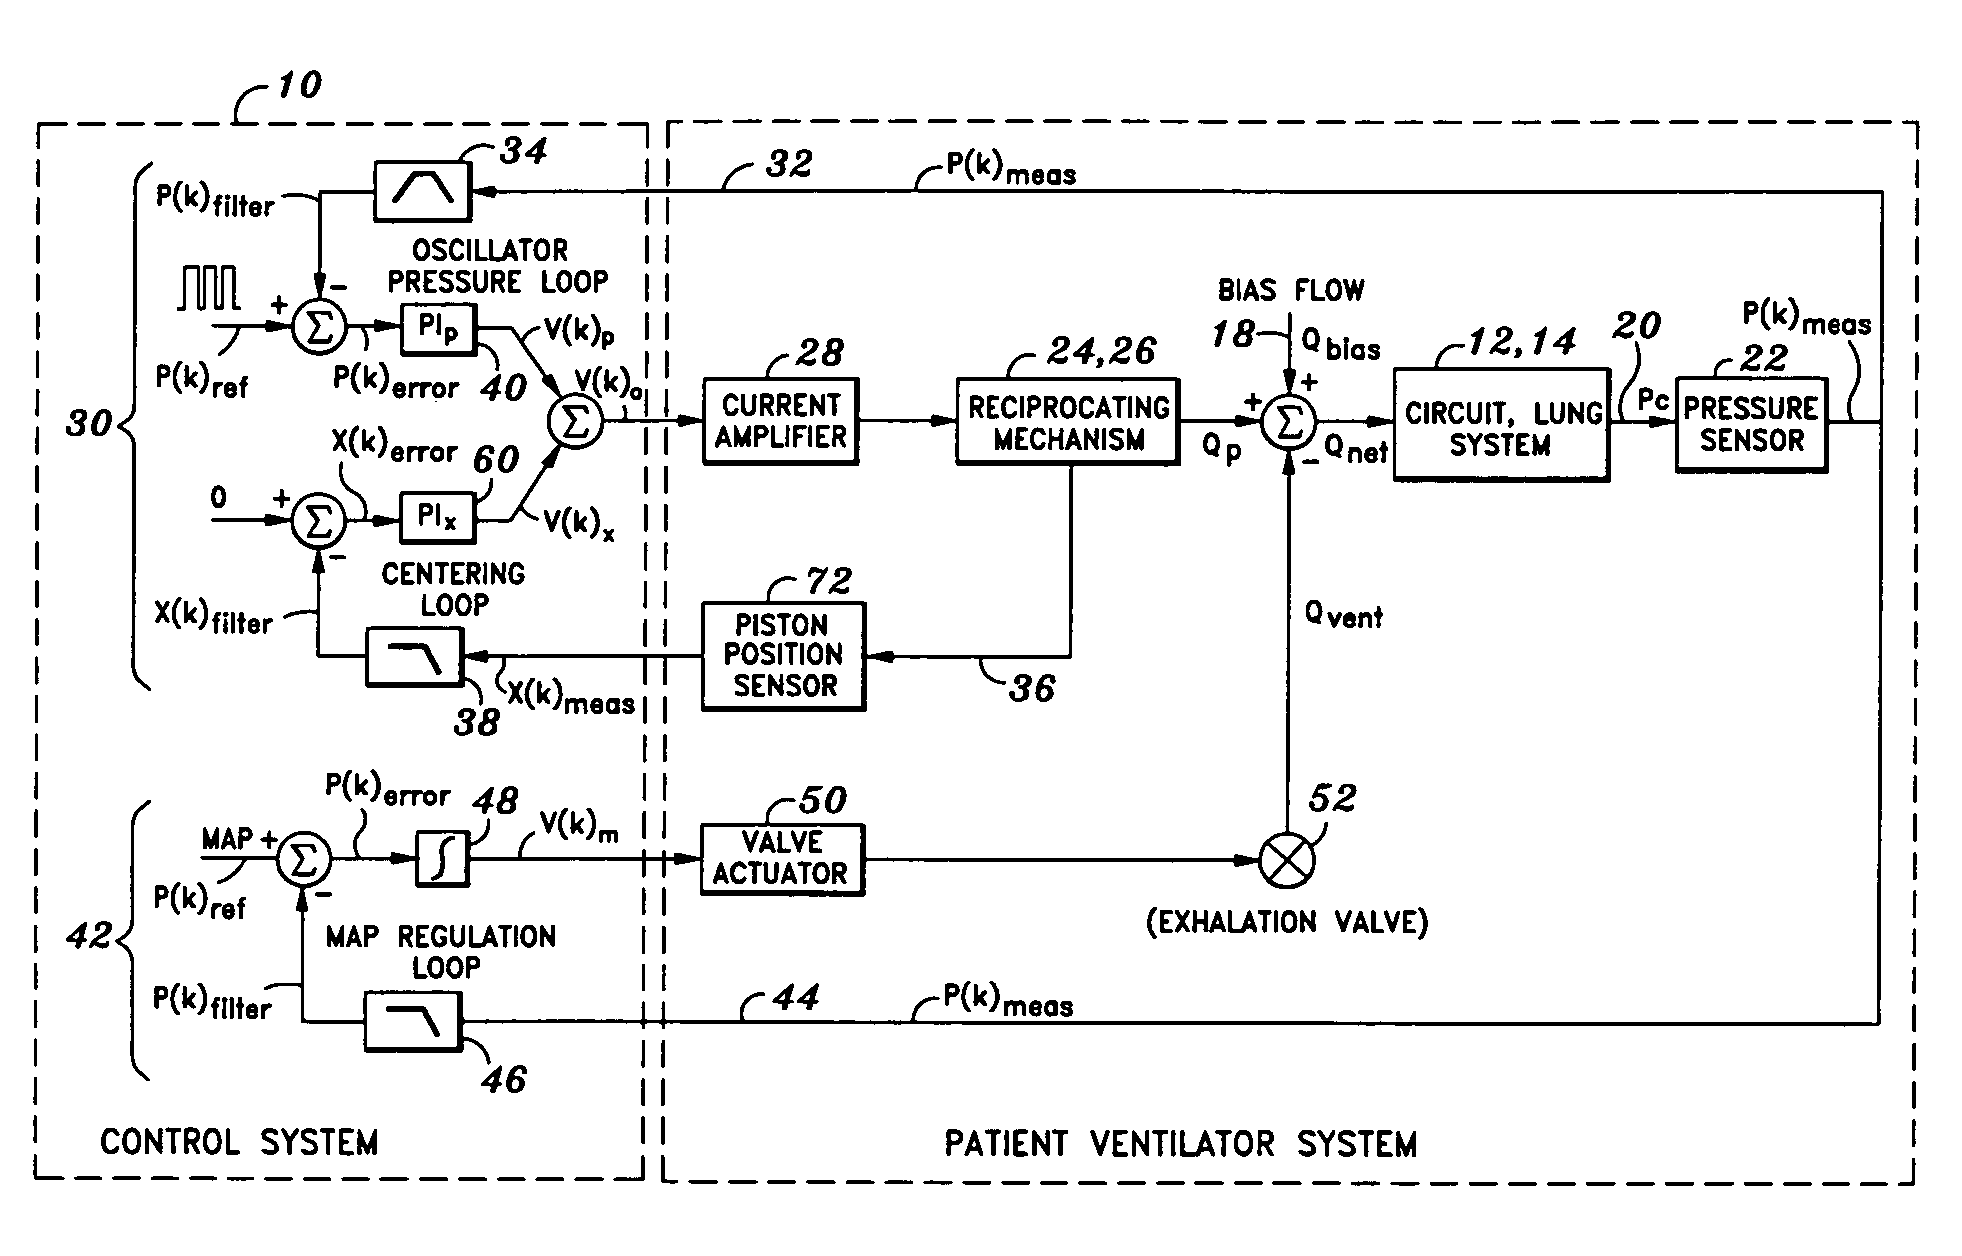 Closed loop control system for a high frequency oscillation ventilator